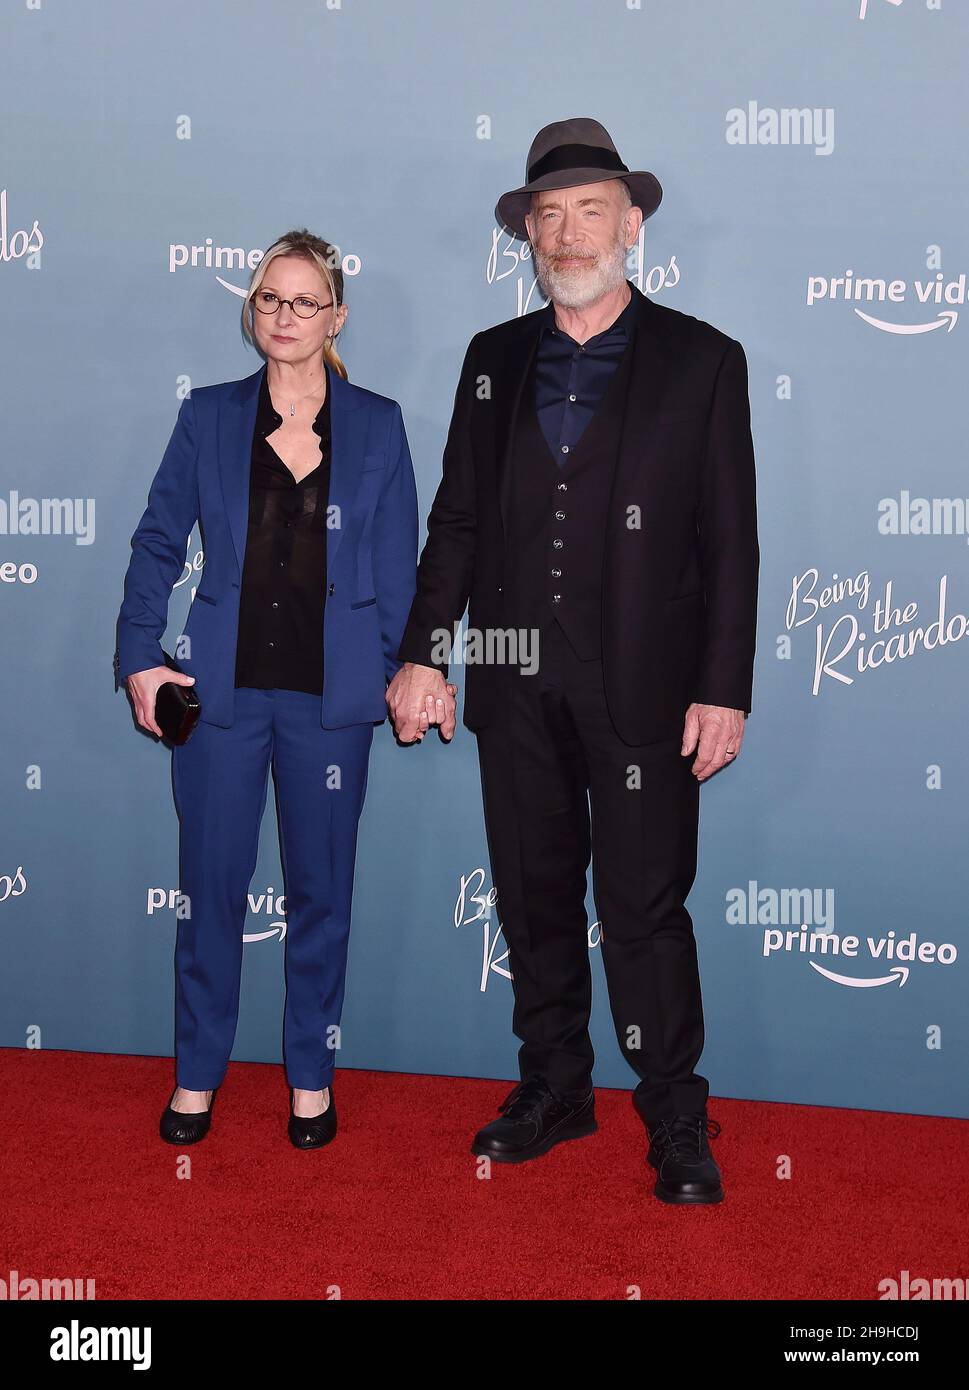 LOS ANGELES, CA - DECEMBER 06: (L-R) Michelle Schumacher and J.K. Simmons  attends the Los Angeles Premiere Of Amazon Studios' "Being The Ricardos" at  Academy Museum of Motion Pictures on December 06,